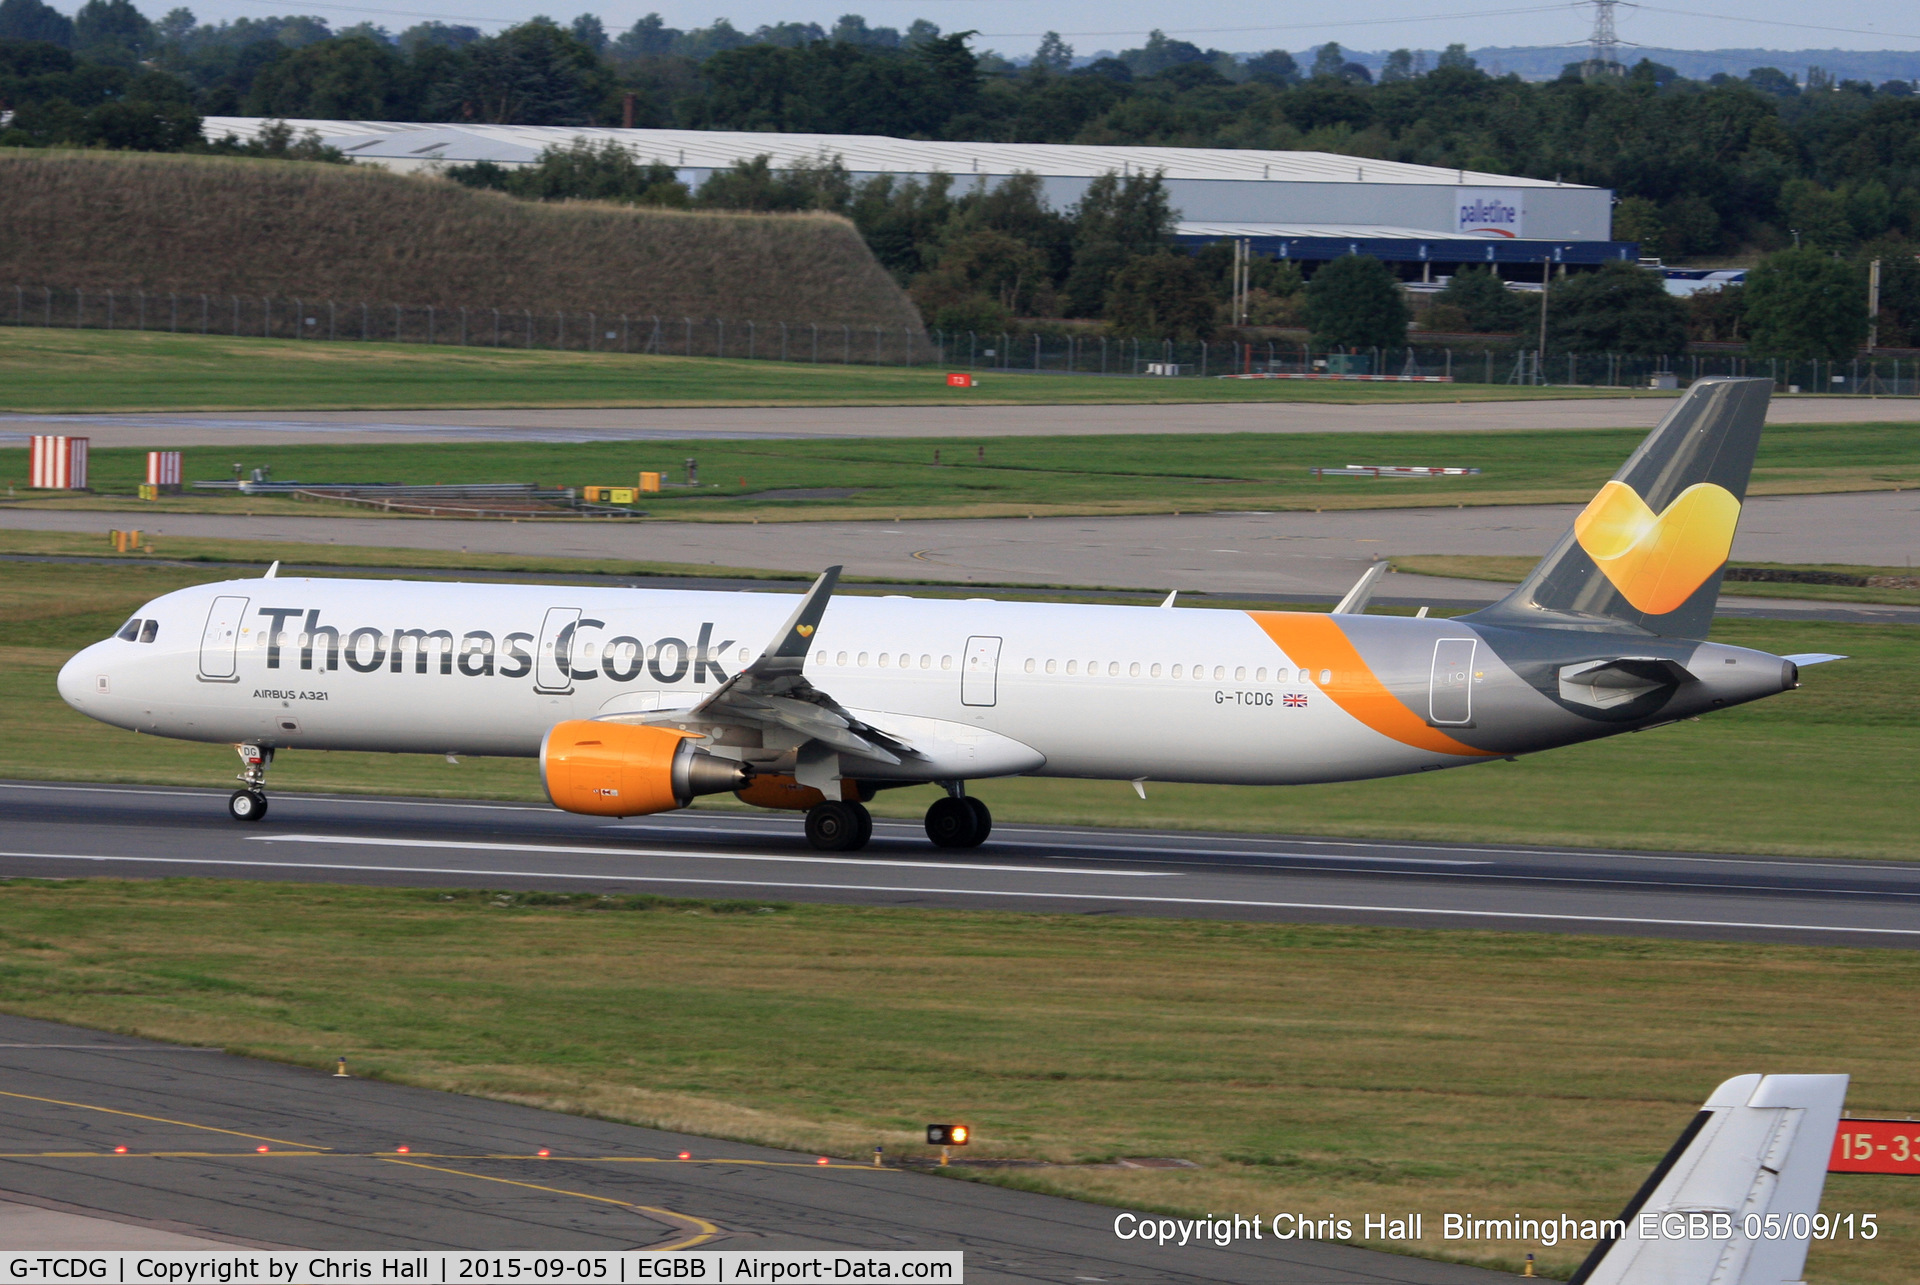 G-TCDG, 2014 Airbus A321-211 C/N 6122, Thomas Cook Airlines